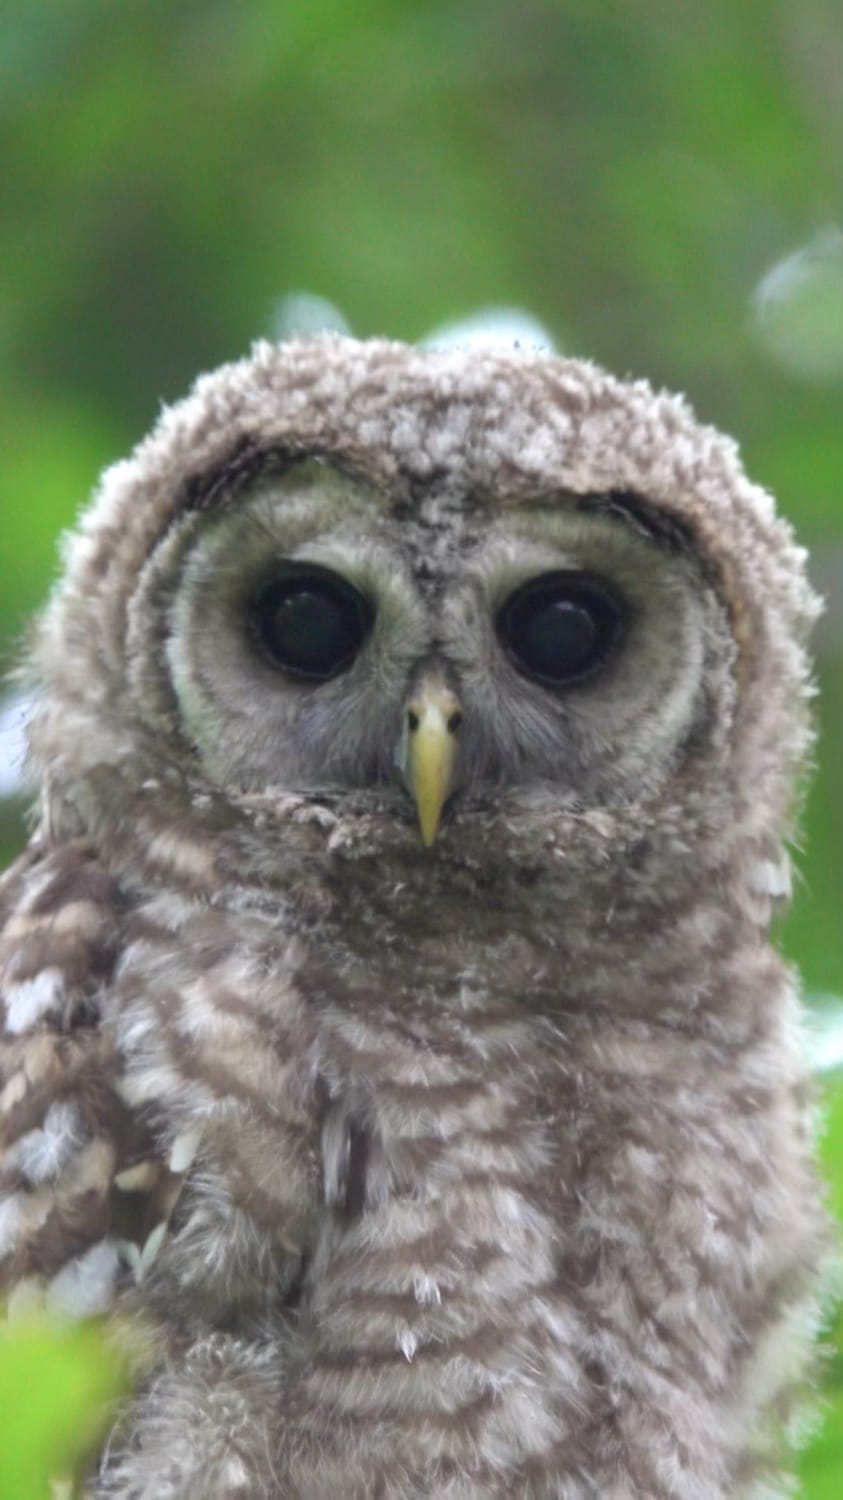 I had this pretty intense staredown with a wild Barred owlet! QC-Canada